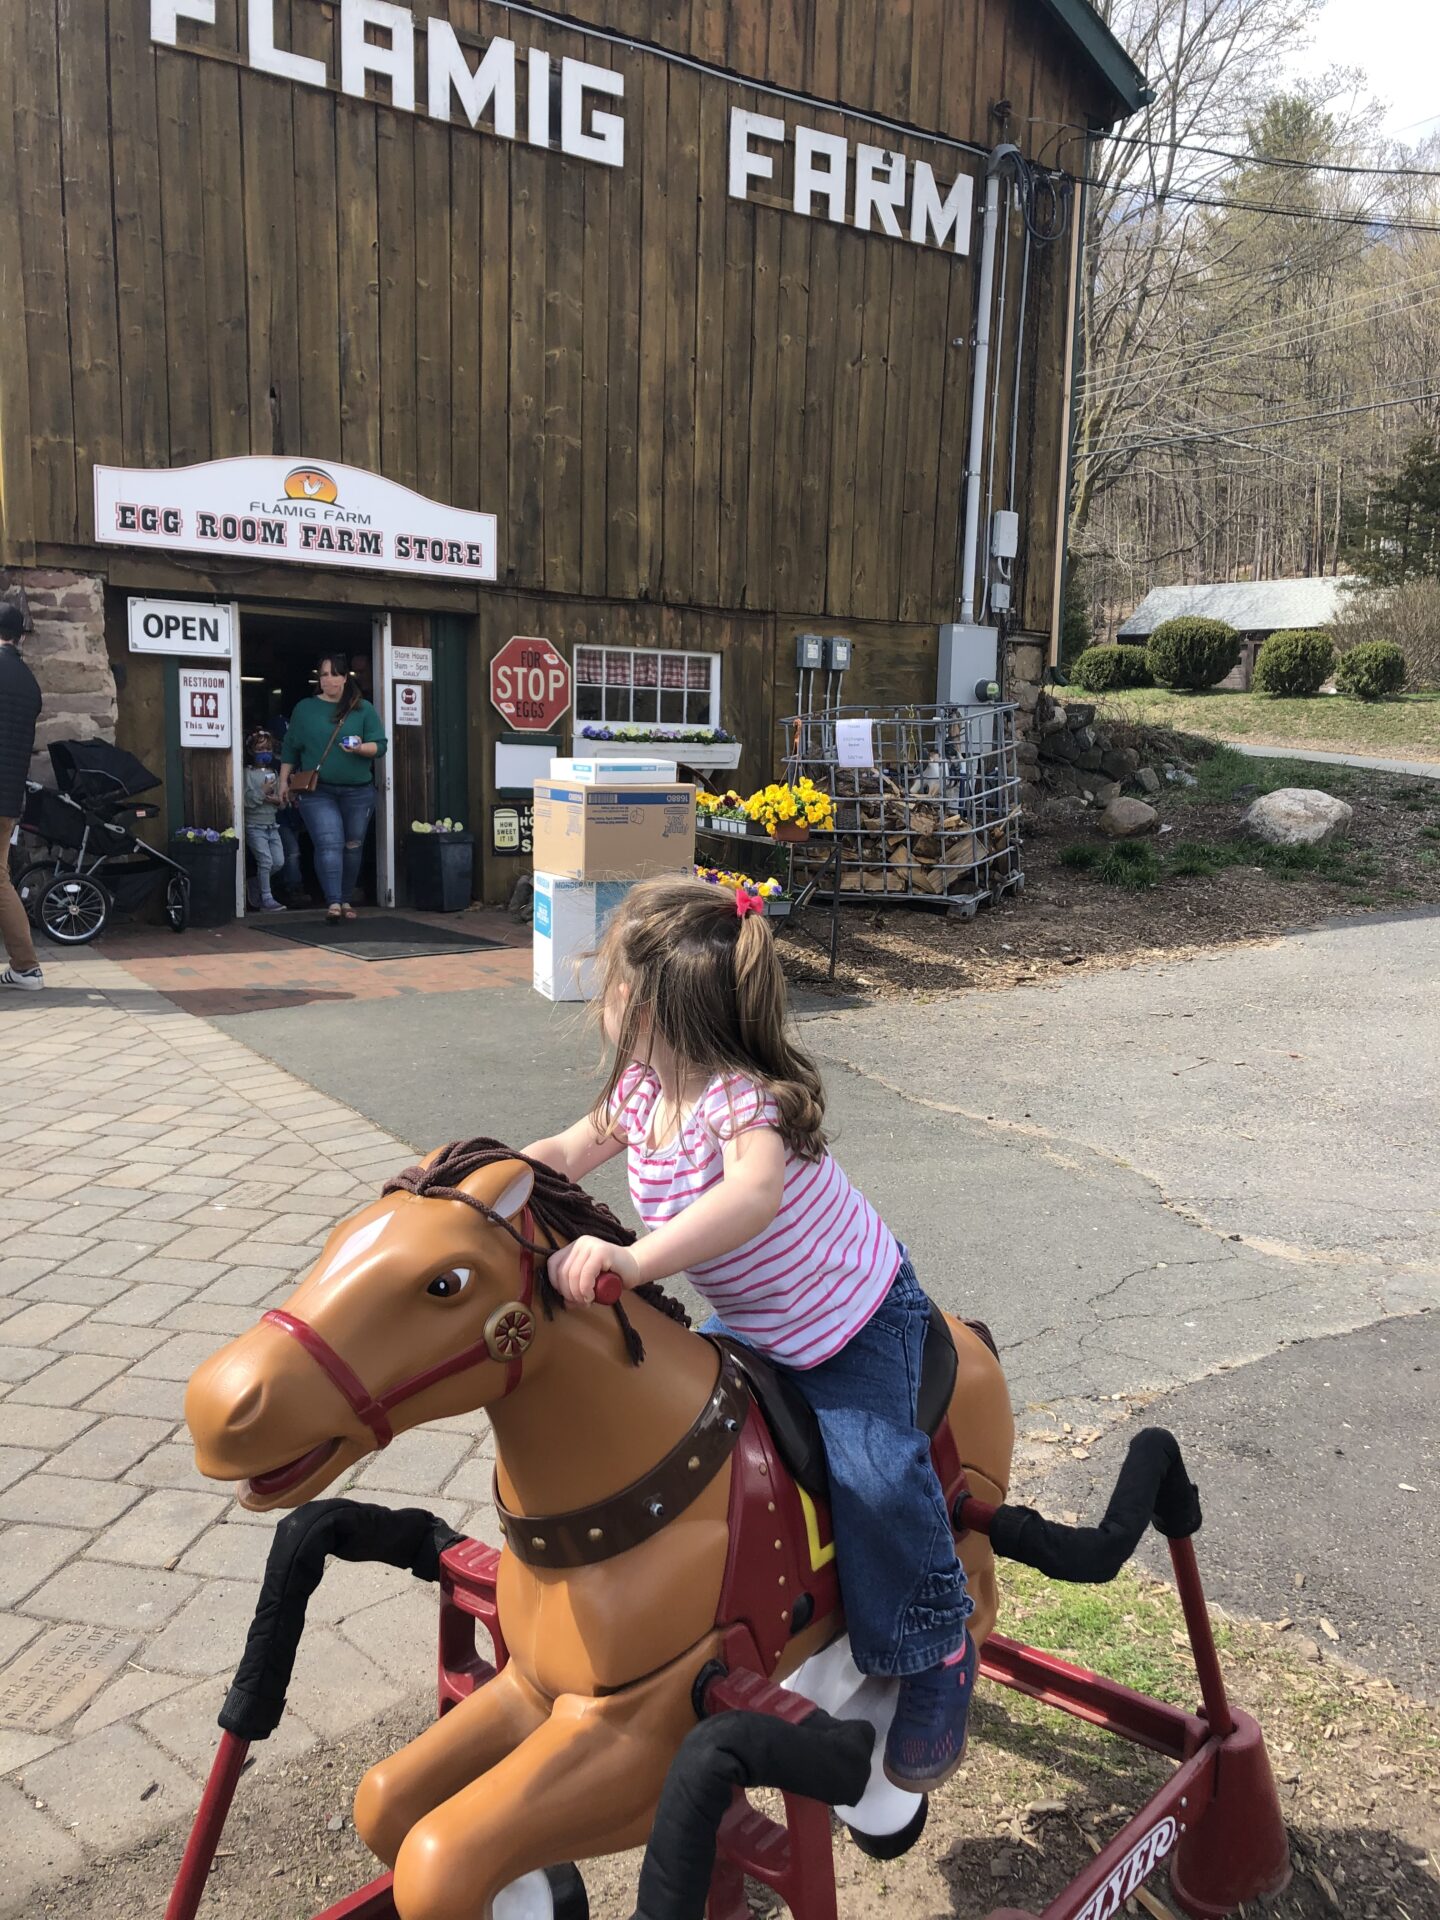 image of child riding toy horse at flamig farms in west simsbury, ct.